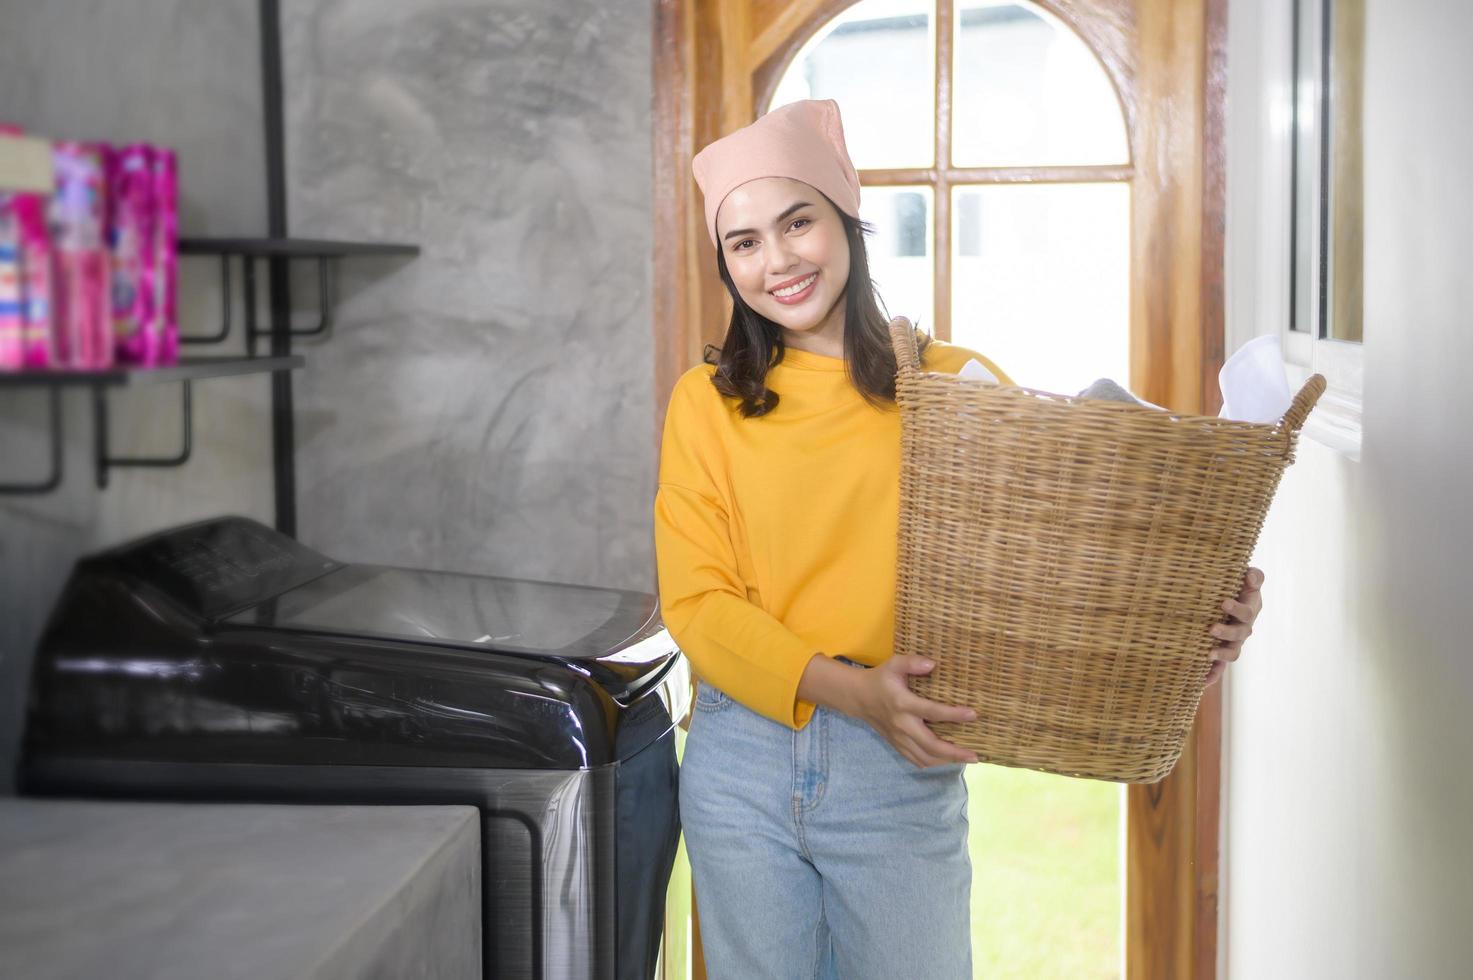 Young happy woman wearing yellow shirt holding a basket full of clothes at home, laundry concept photo